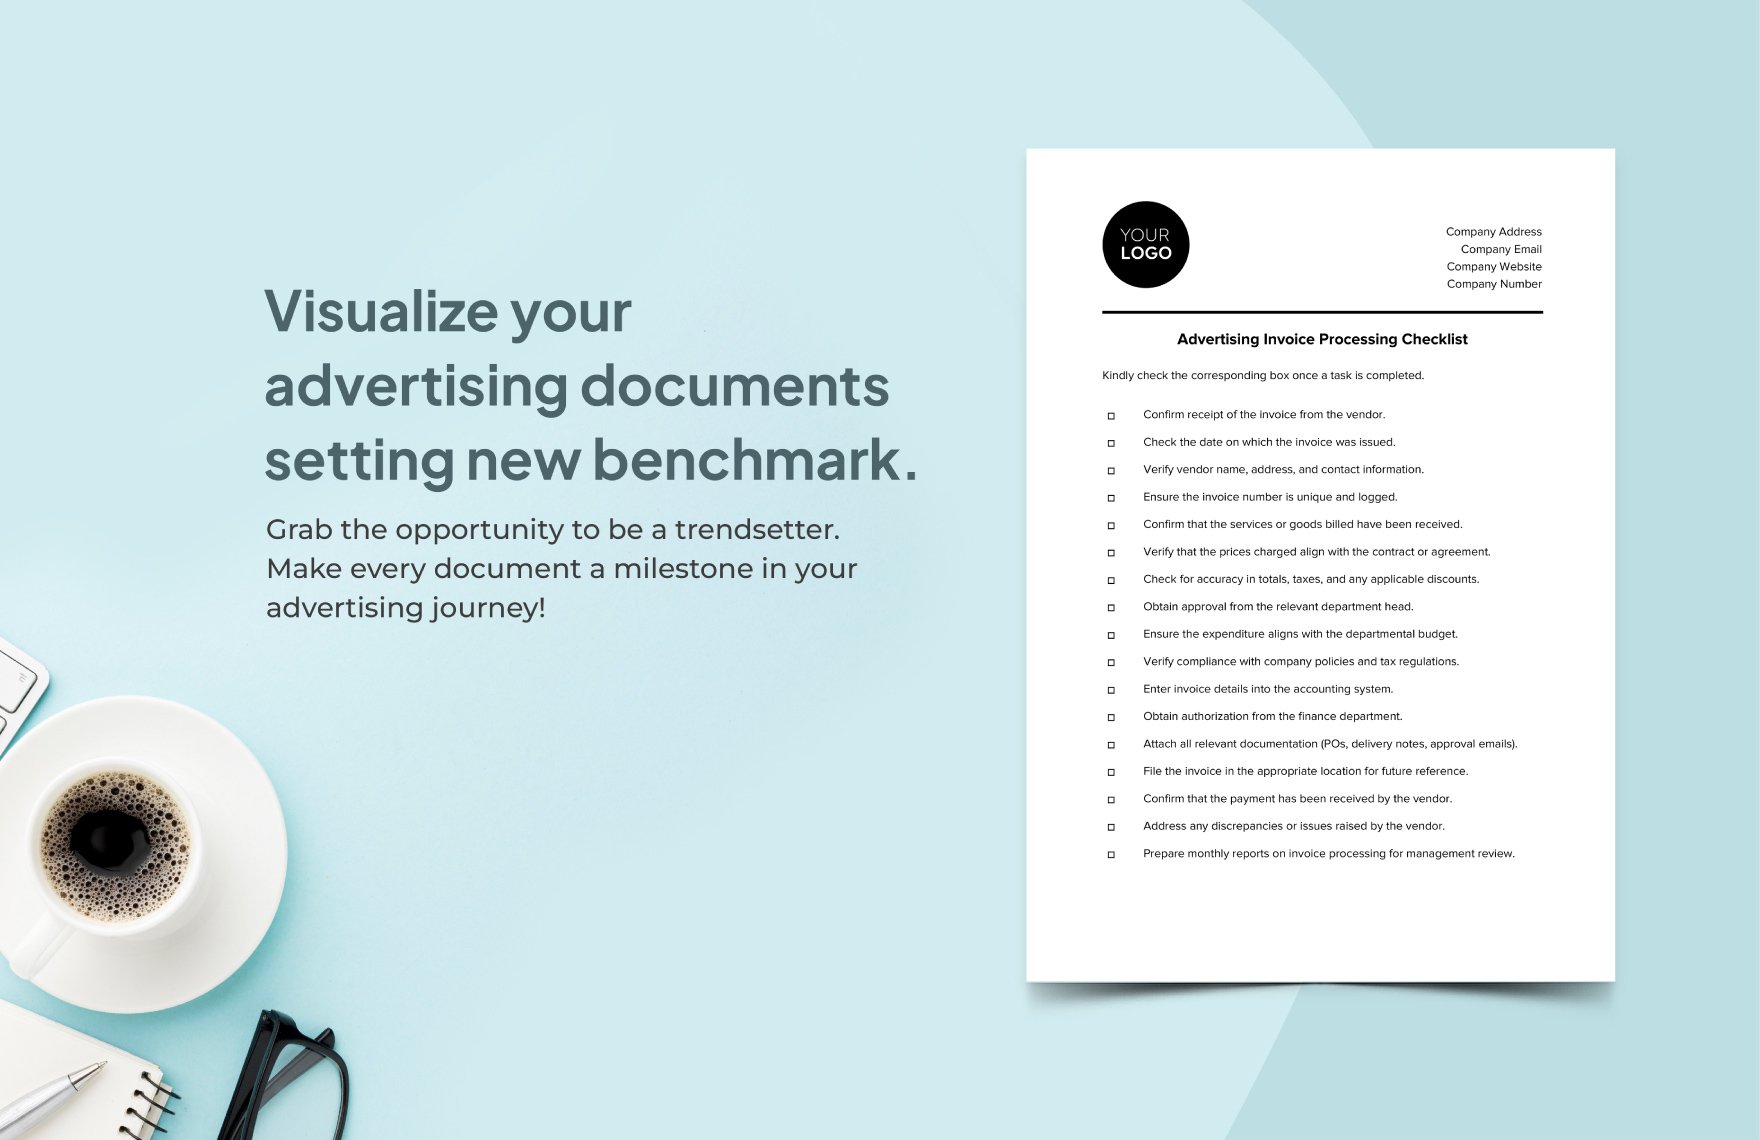 Advertising Invoice Processing Checklist Template